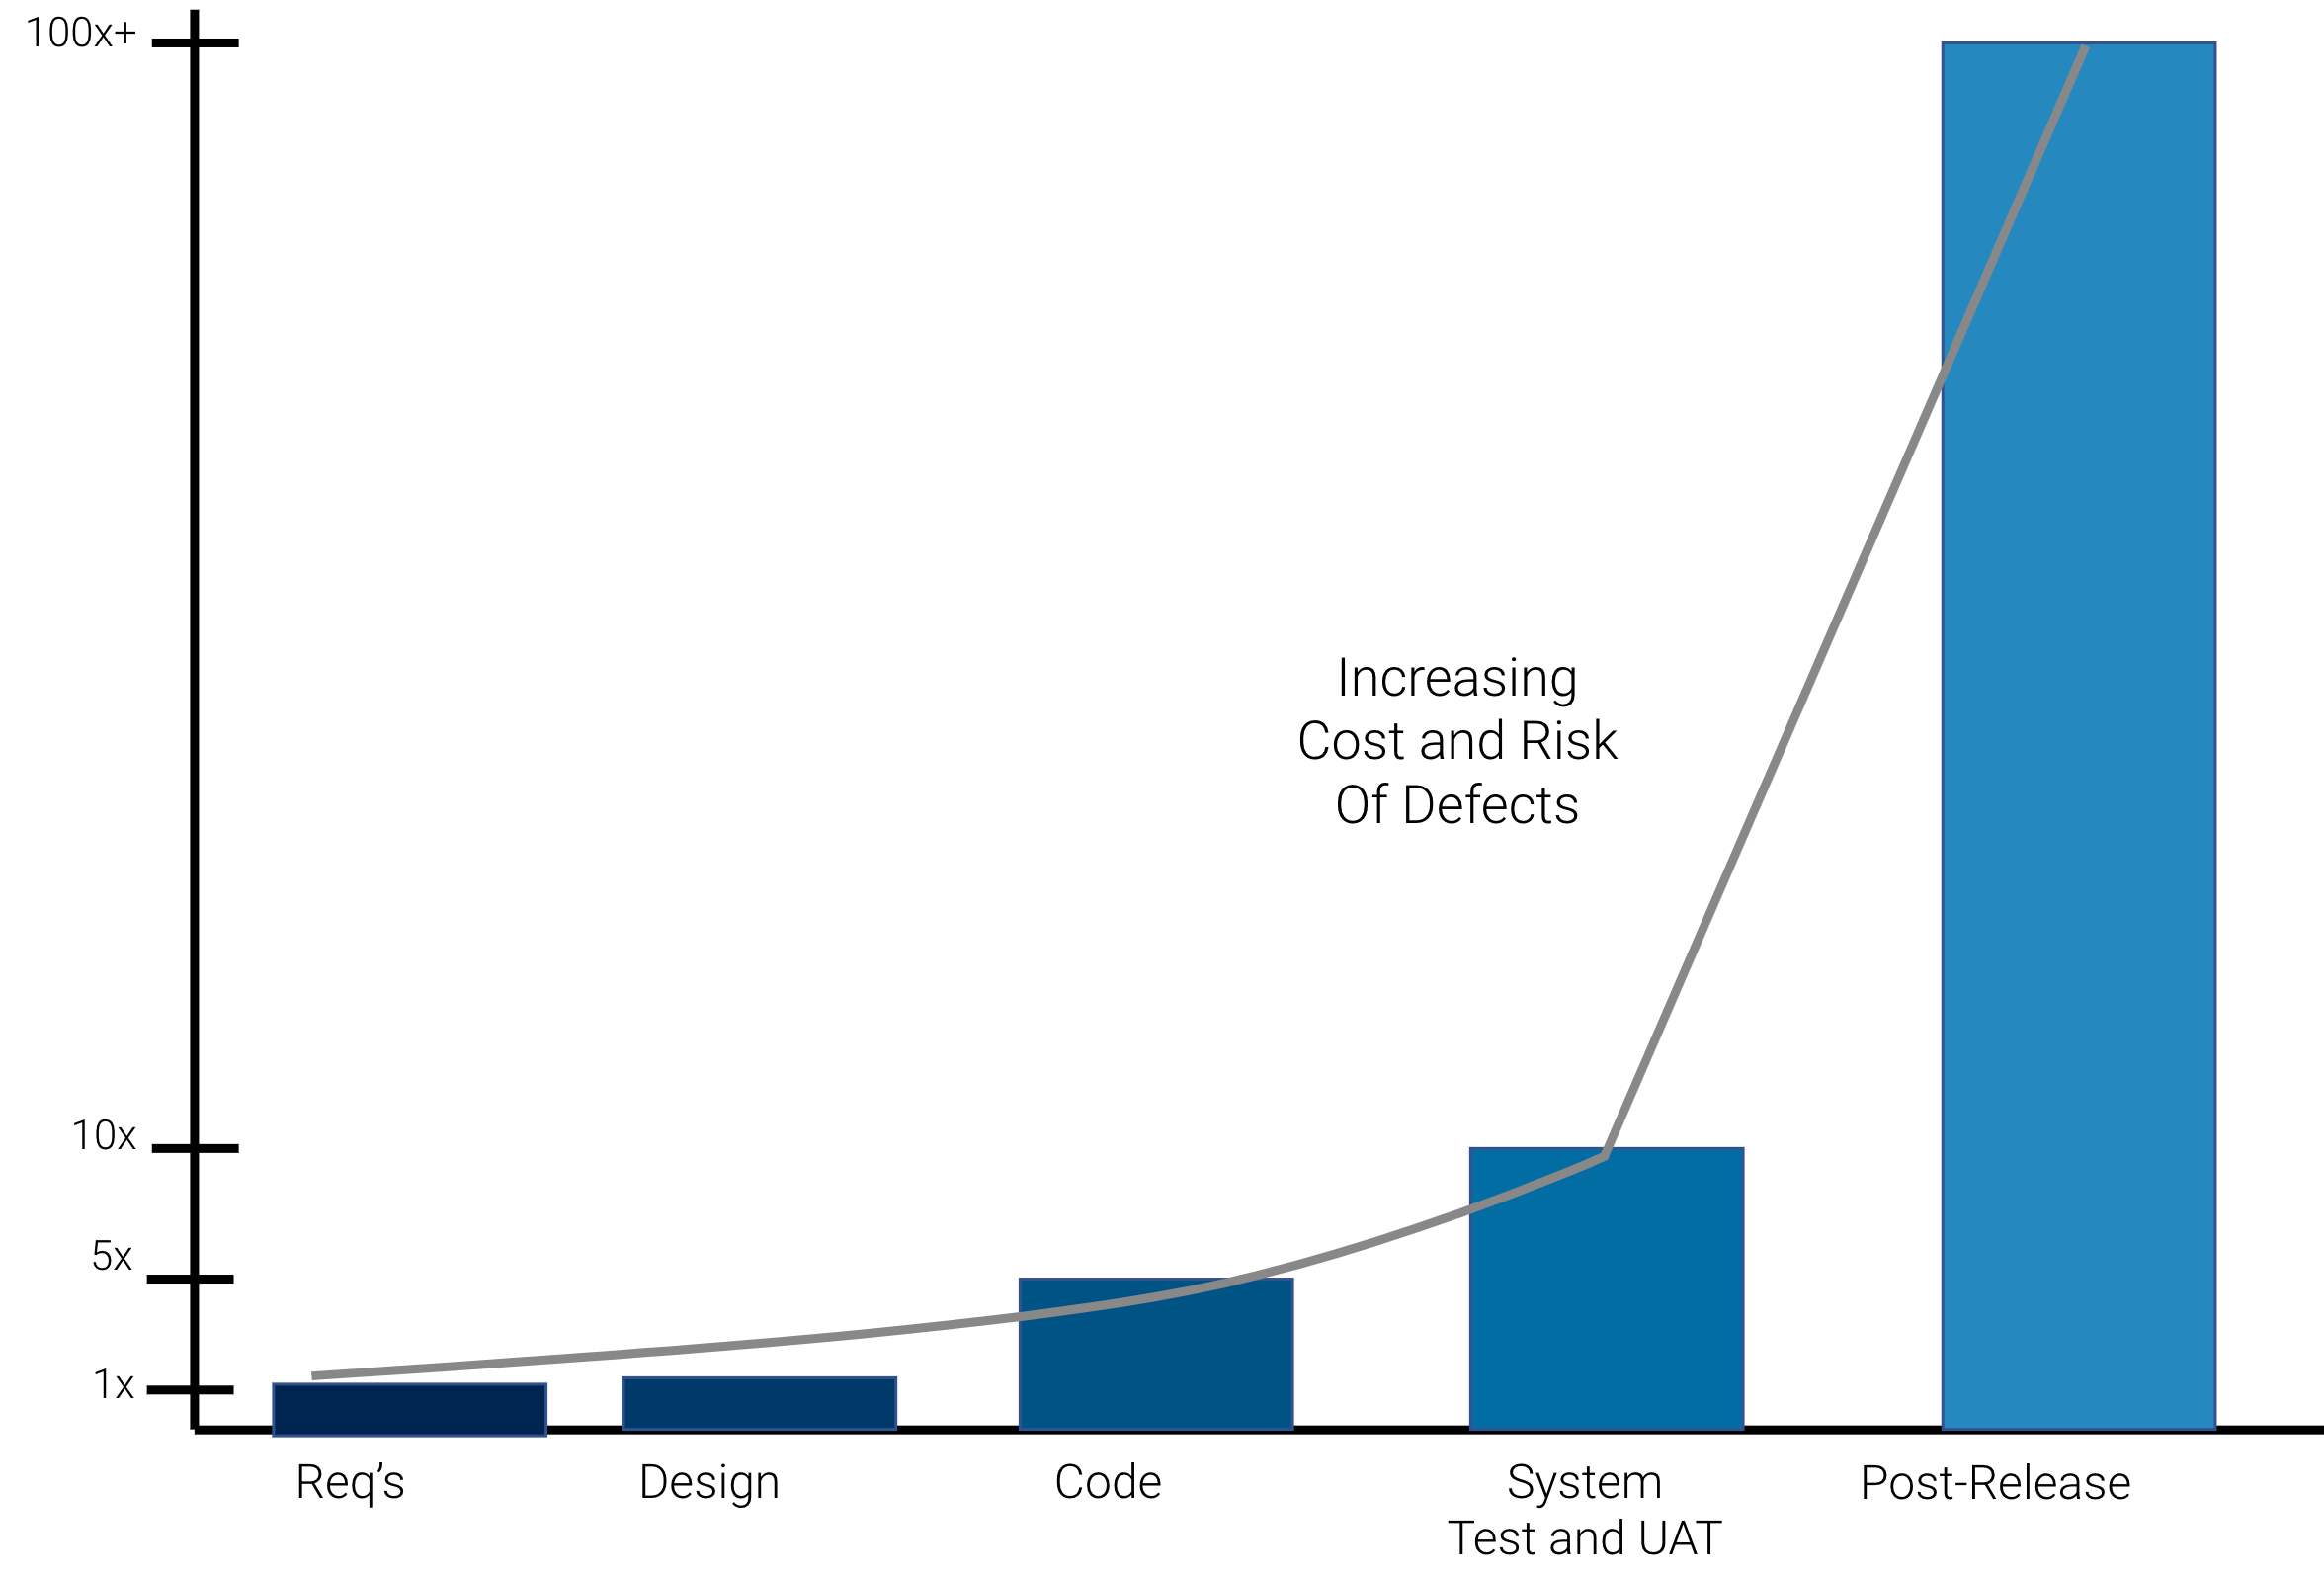 Figure 4 – The Relative Cost of Finding and Fixing Defects (1:10:100 Rule)